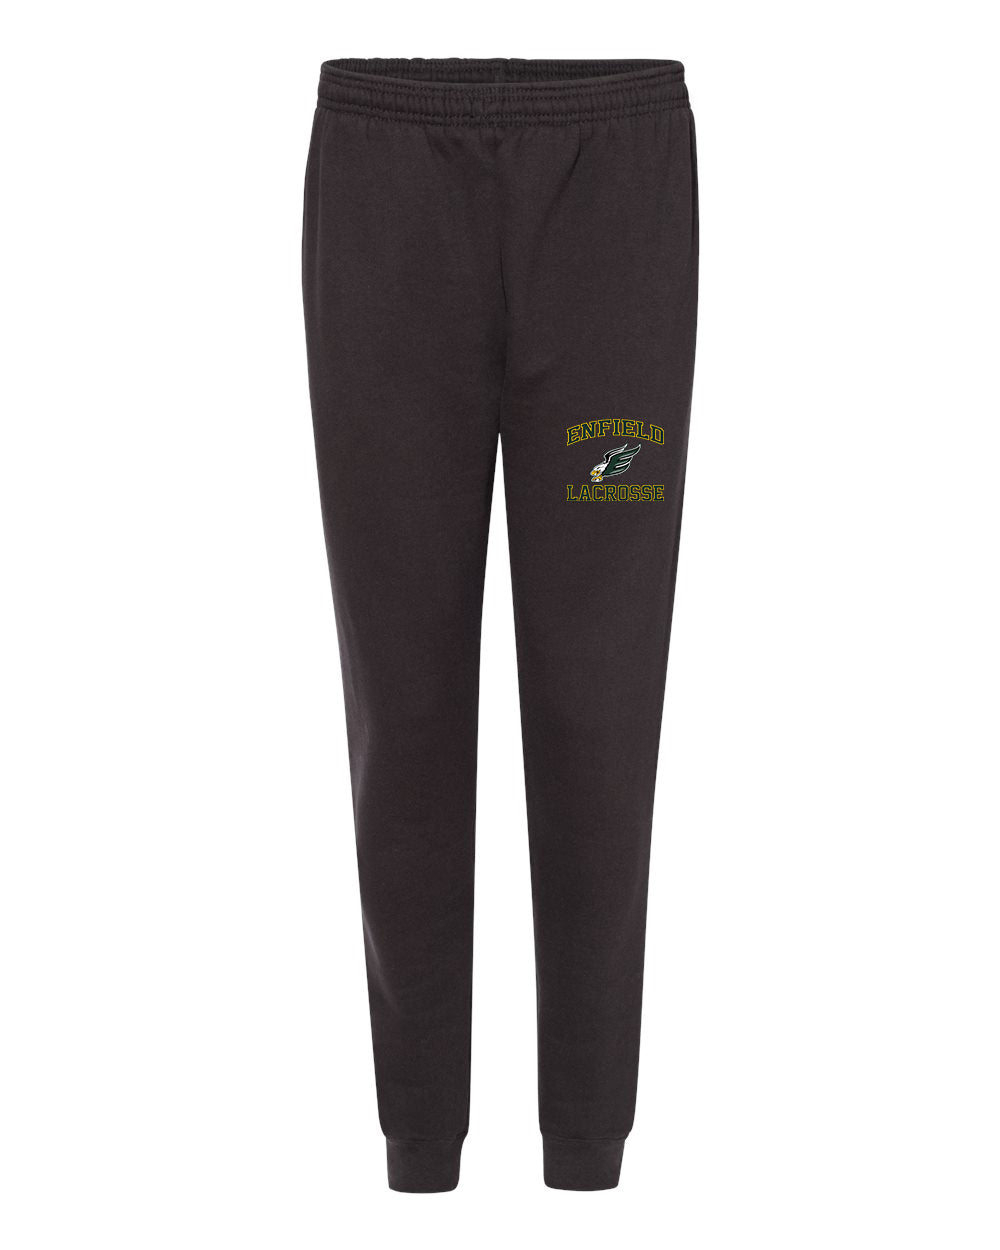 EHL Badger Fleece Jogger "Classic" - 1215 (color options available)